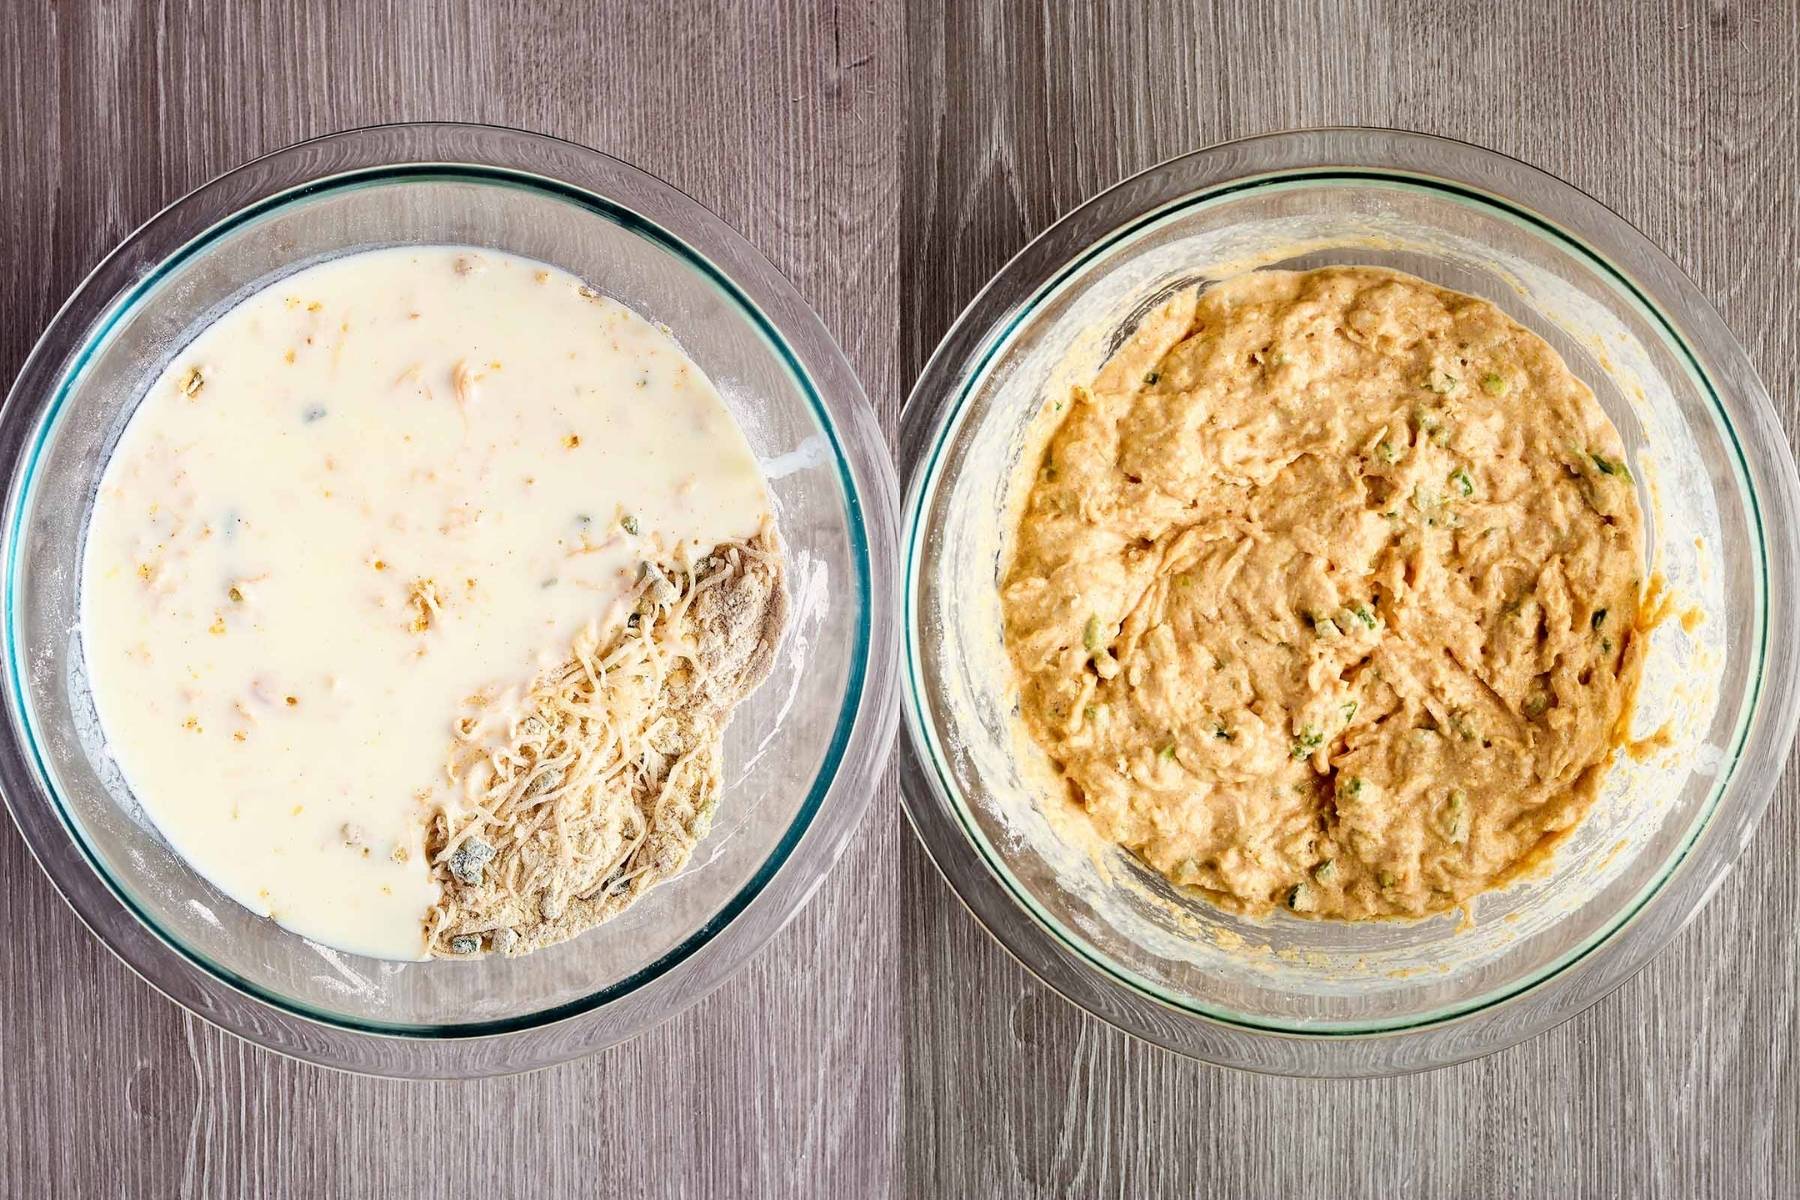 Batter before and after wet ingredients.